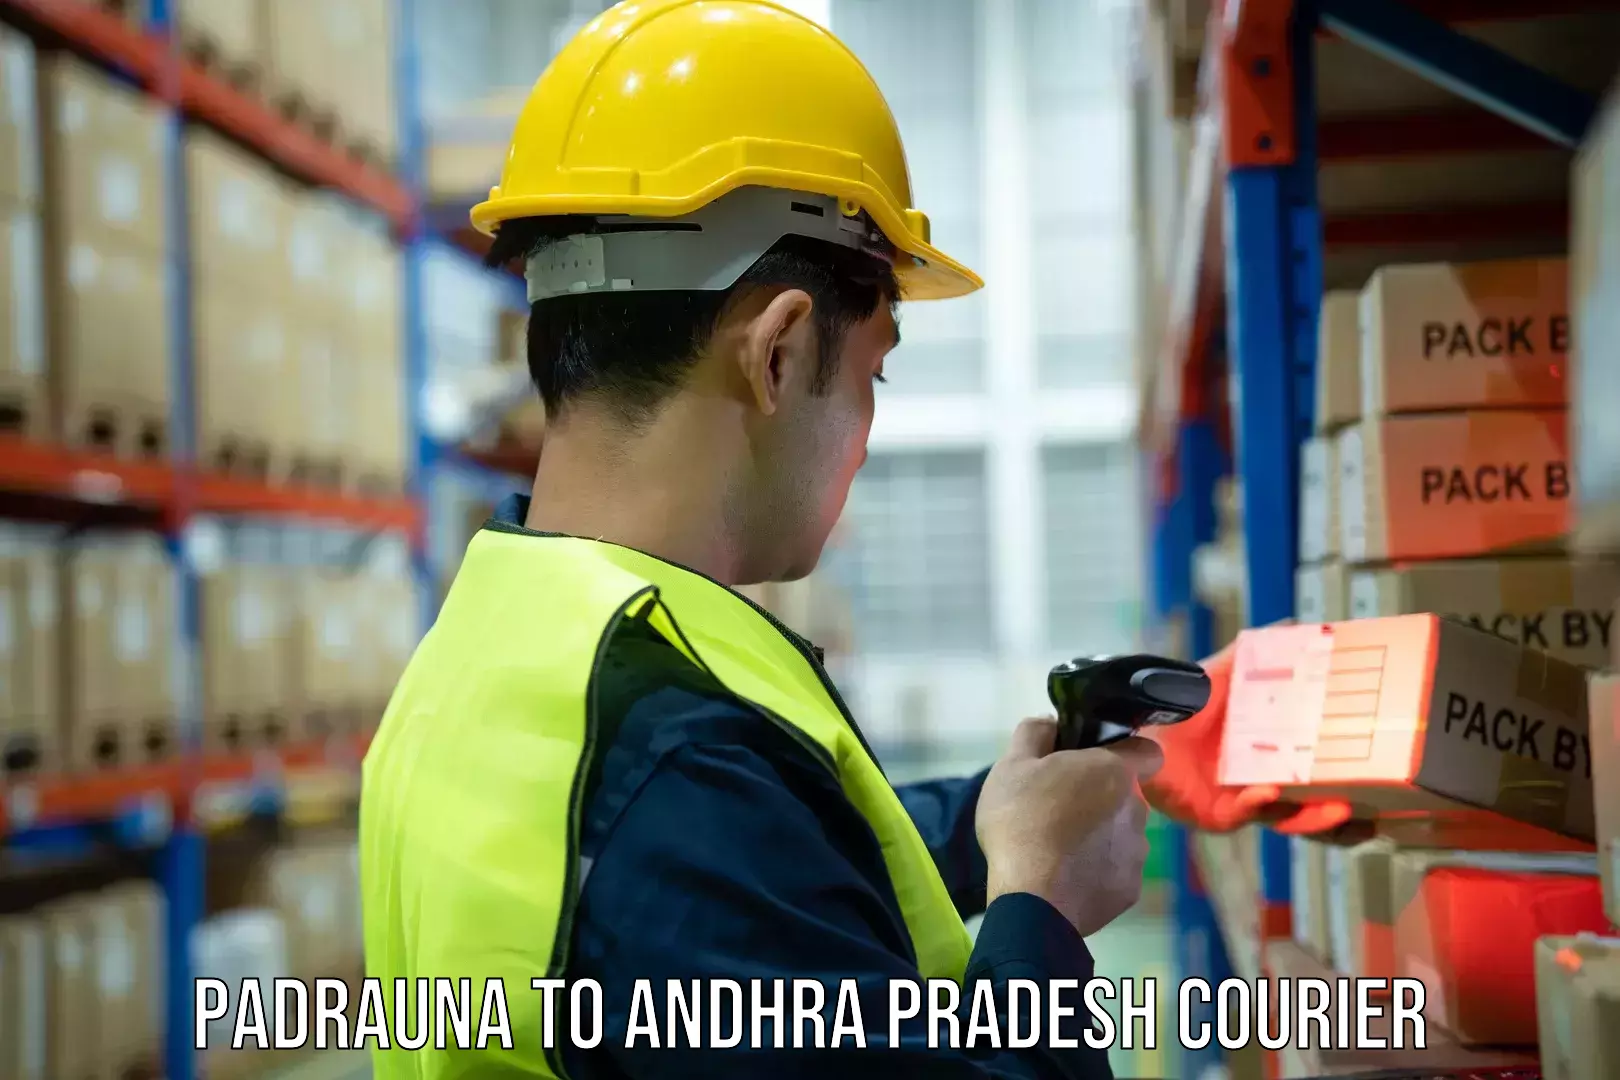 24/7 courier service in Padrauna to Andhra Pradesh